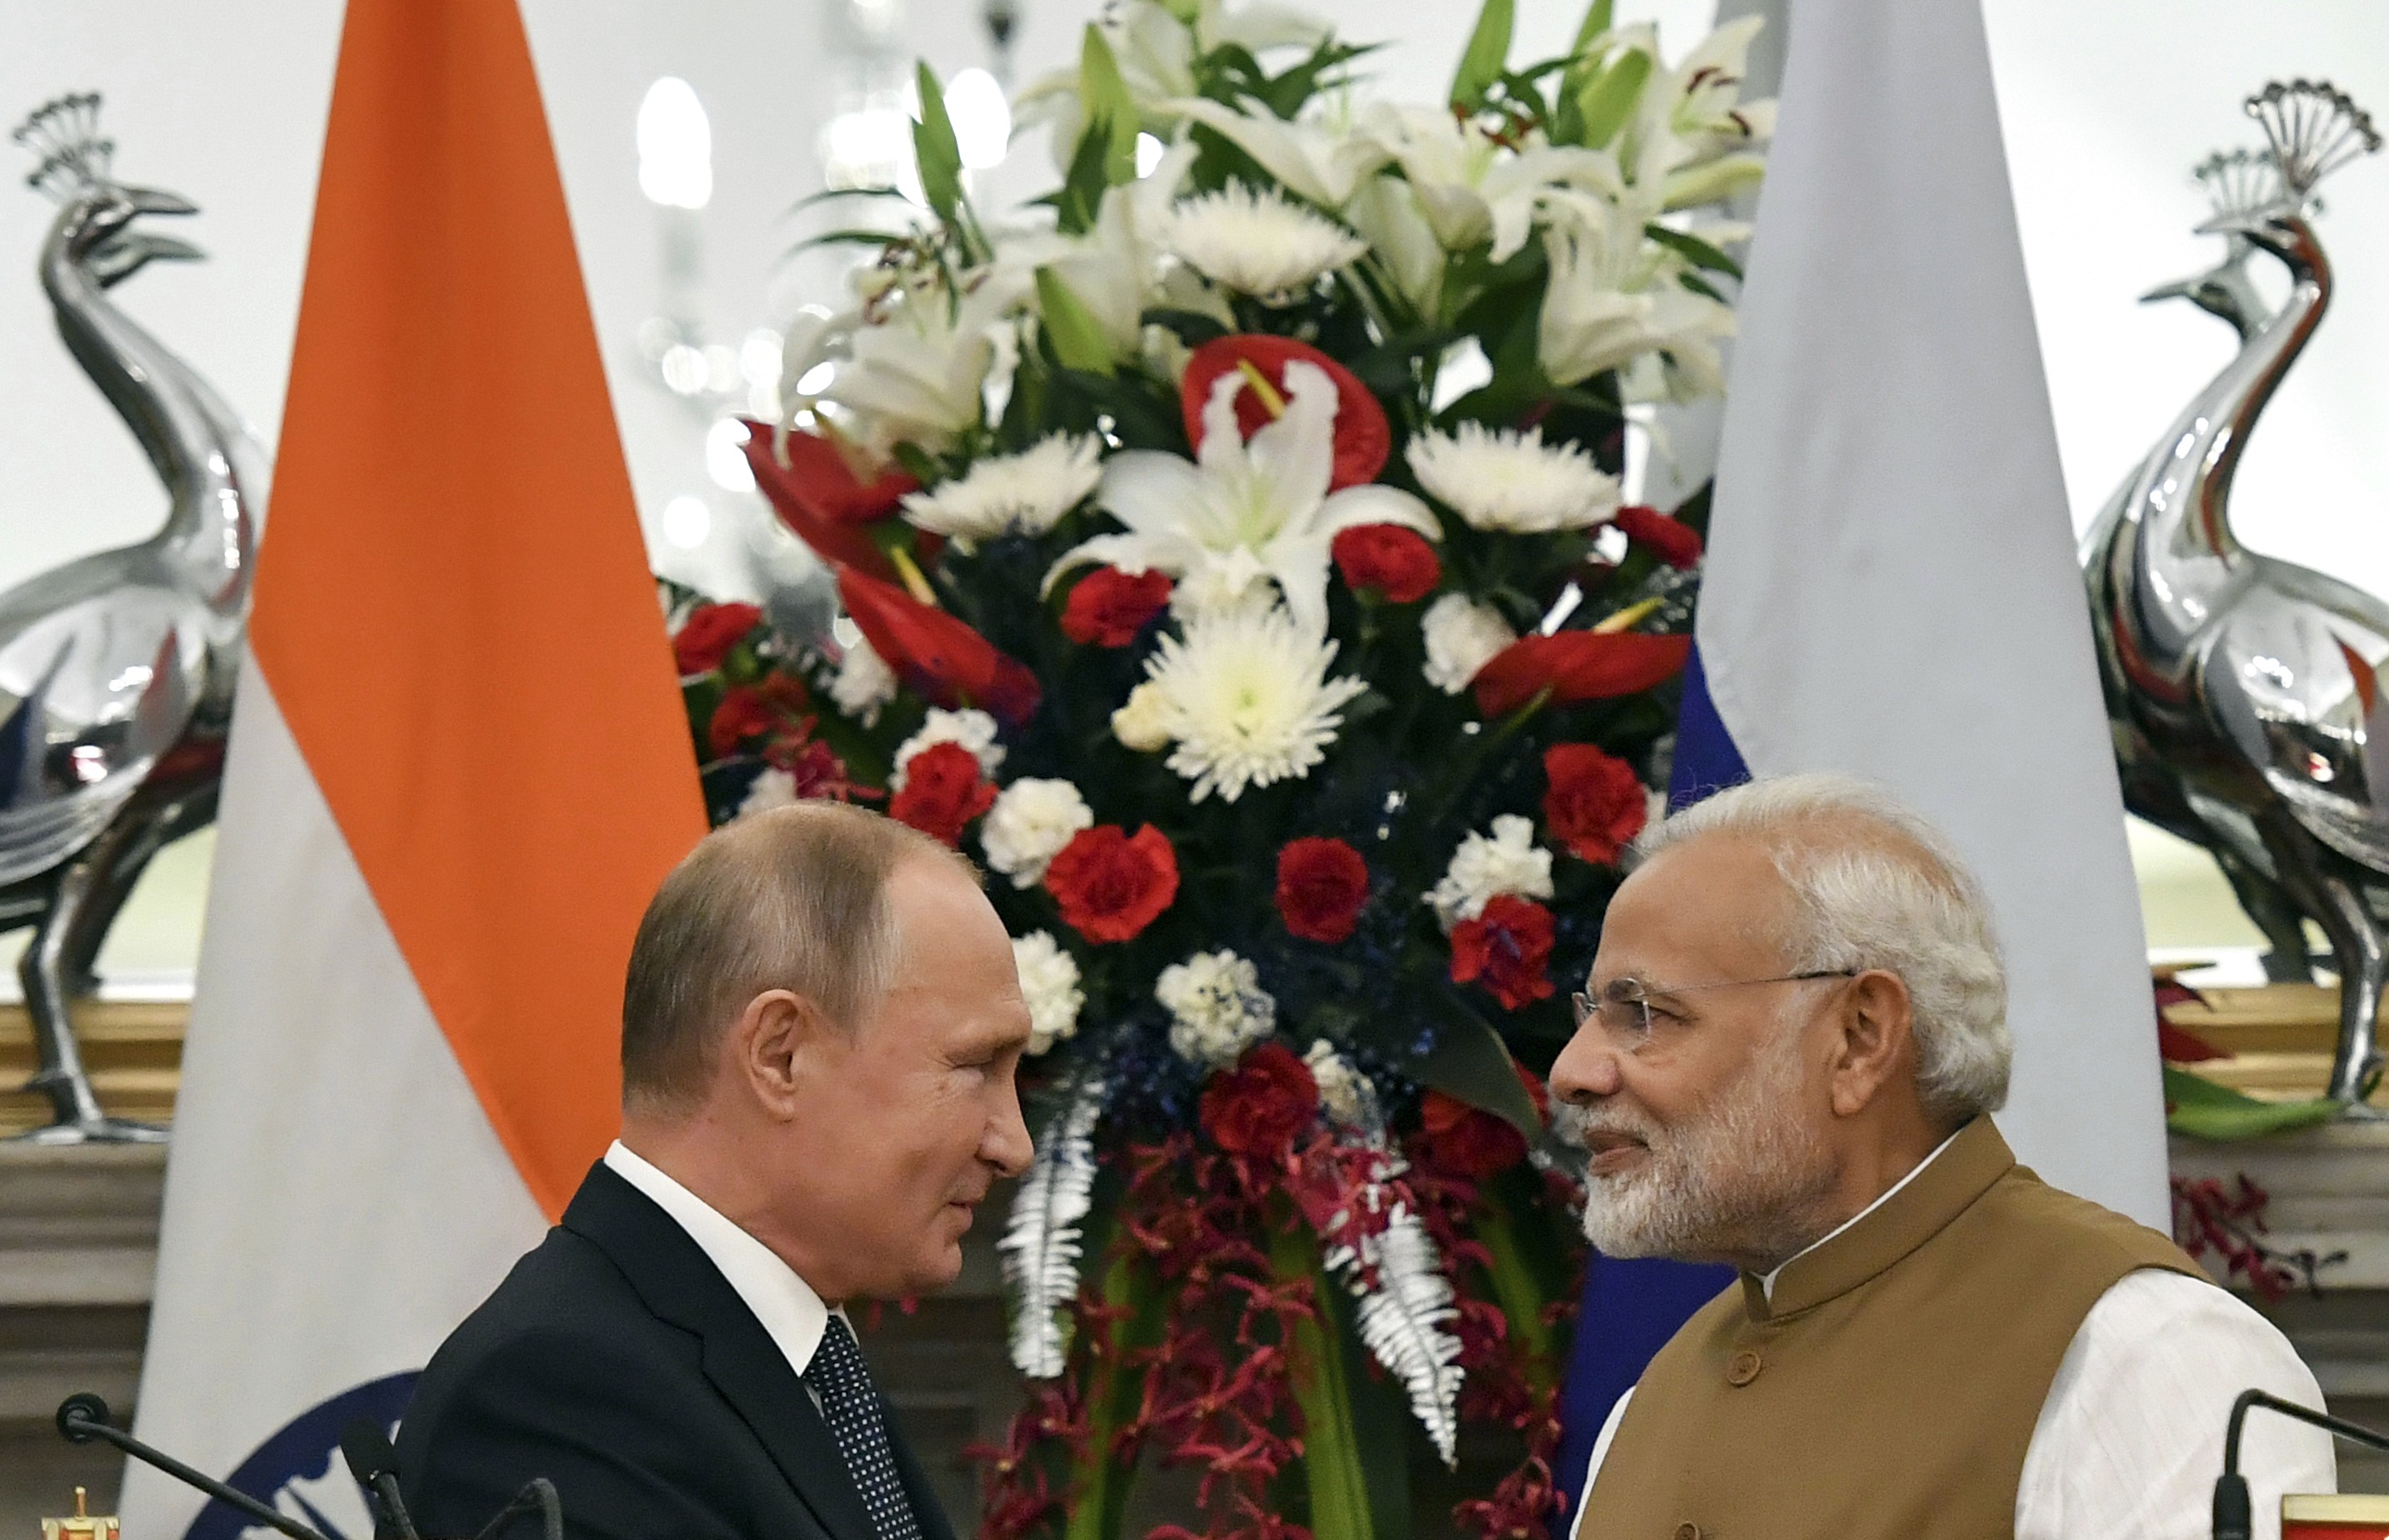 Putin’s visit to India saw the low-key conclusion of a US$5.4 billion arms deal to appease the US – but as Beijing increases its regional influence, questions loom over the future direction of relations between New Delhi and Moscow